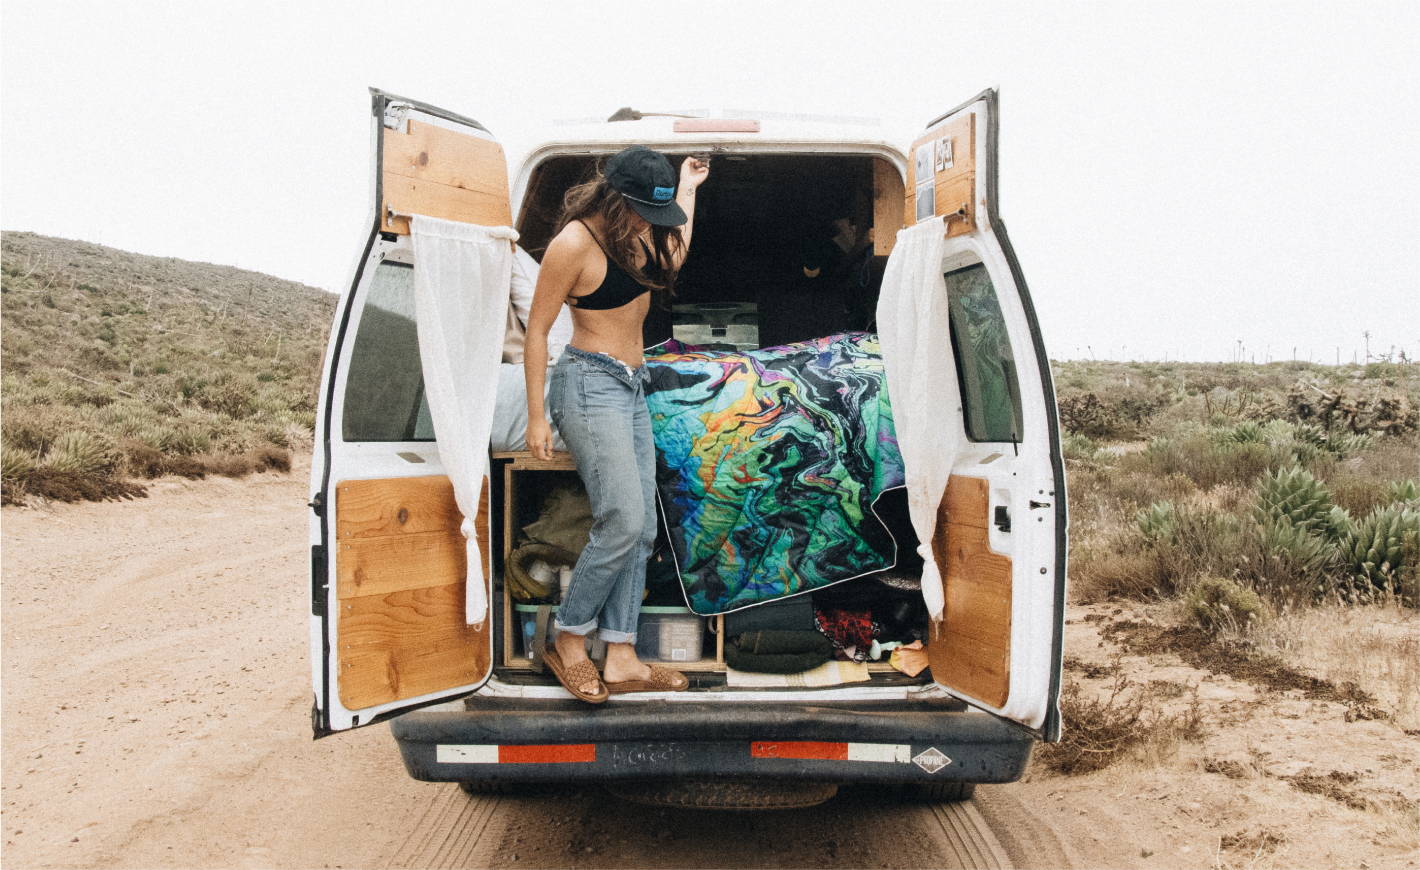 A woman stands in the back of a van with her Rumpl blanket, ready for a journey.